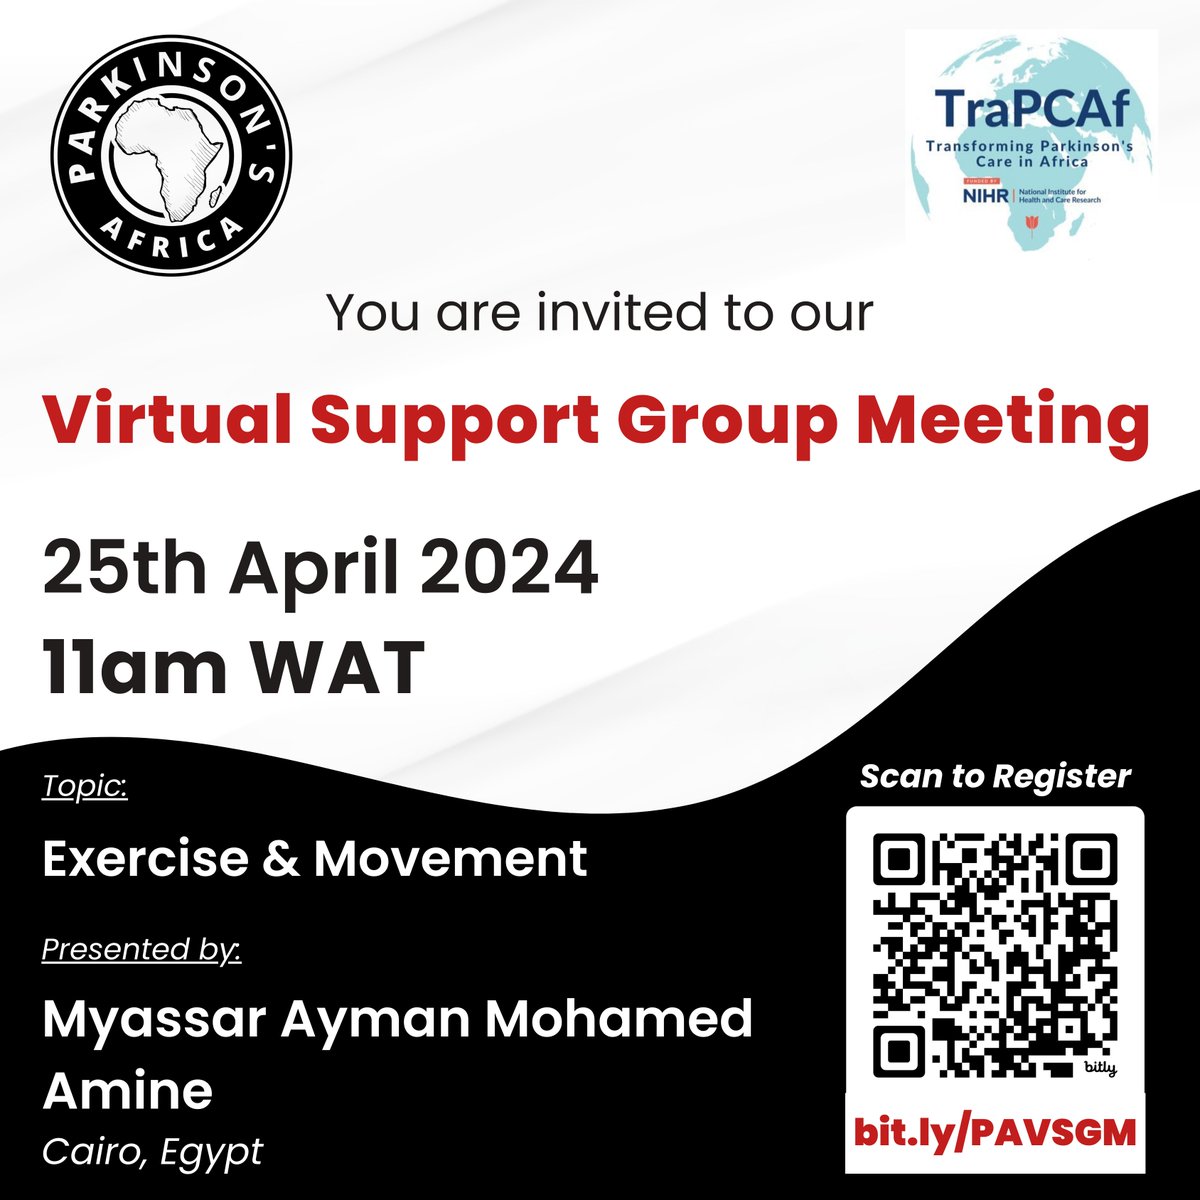 Join our Virtual Support Group organised by EgyParkinson's Resource Center. 🗓 Date: 25th April 2024 🕒Time: 11am West Africa Time / 1pm East Africa Time 📌 Topic: Exercise & Movement 🎙 Presenter: Myassar Mohamed Signup here: bit.ly/PAVSGM We hope to see you there!